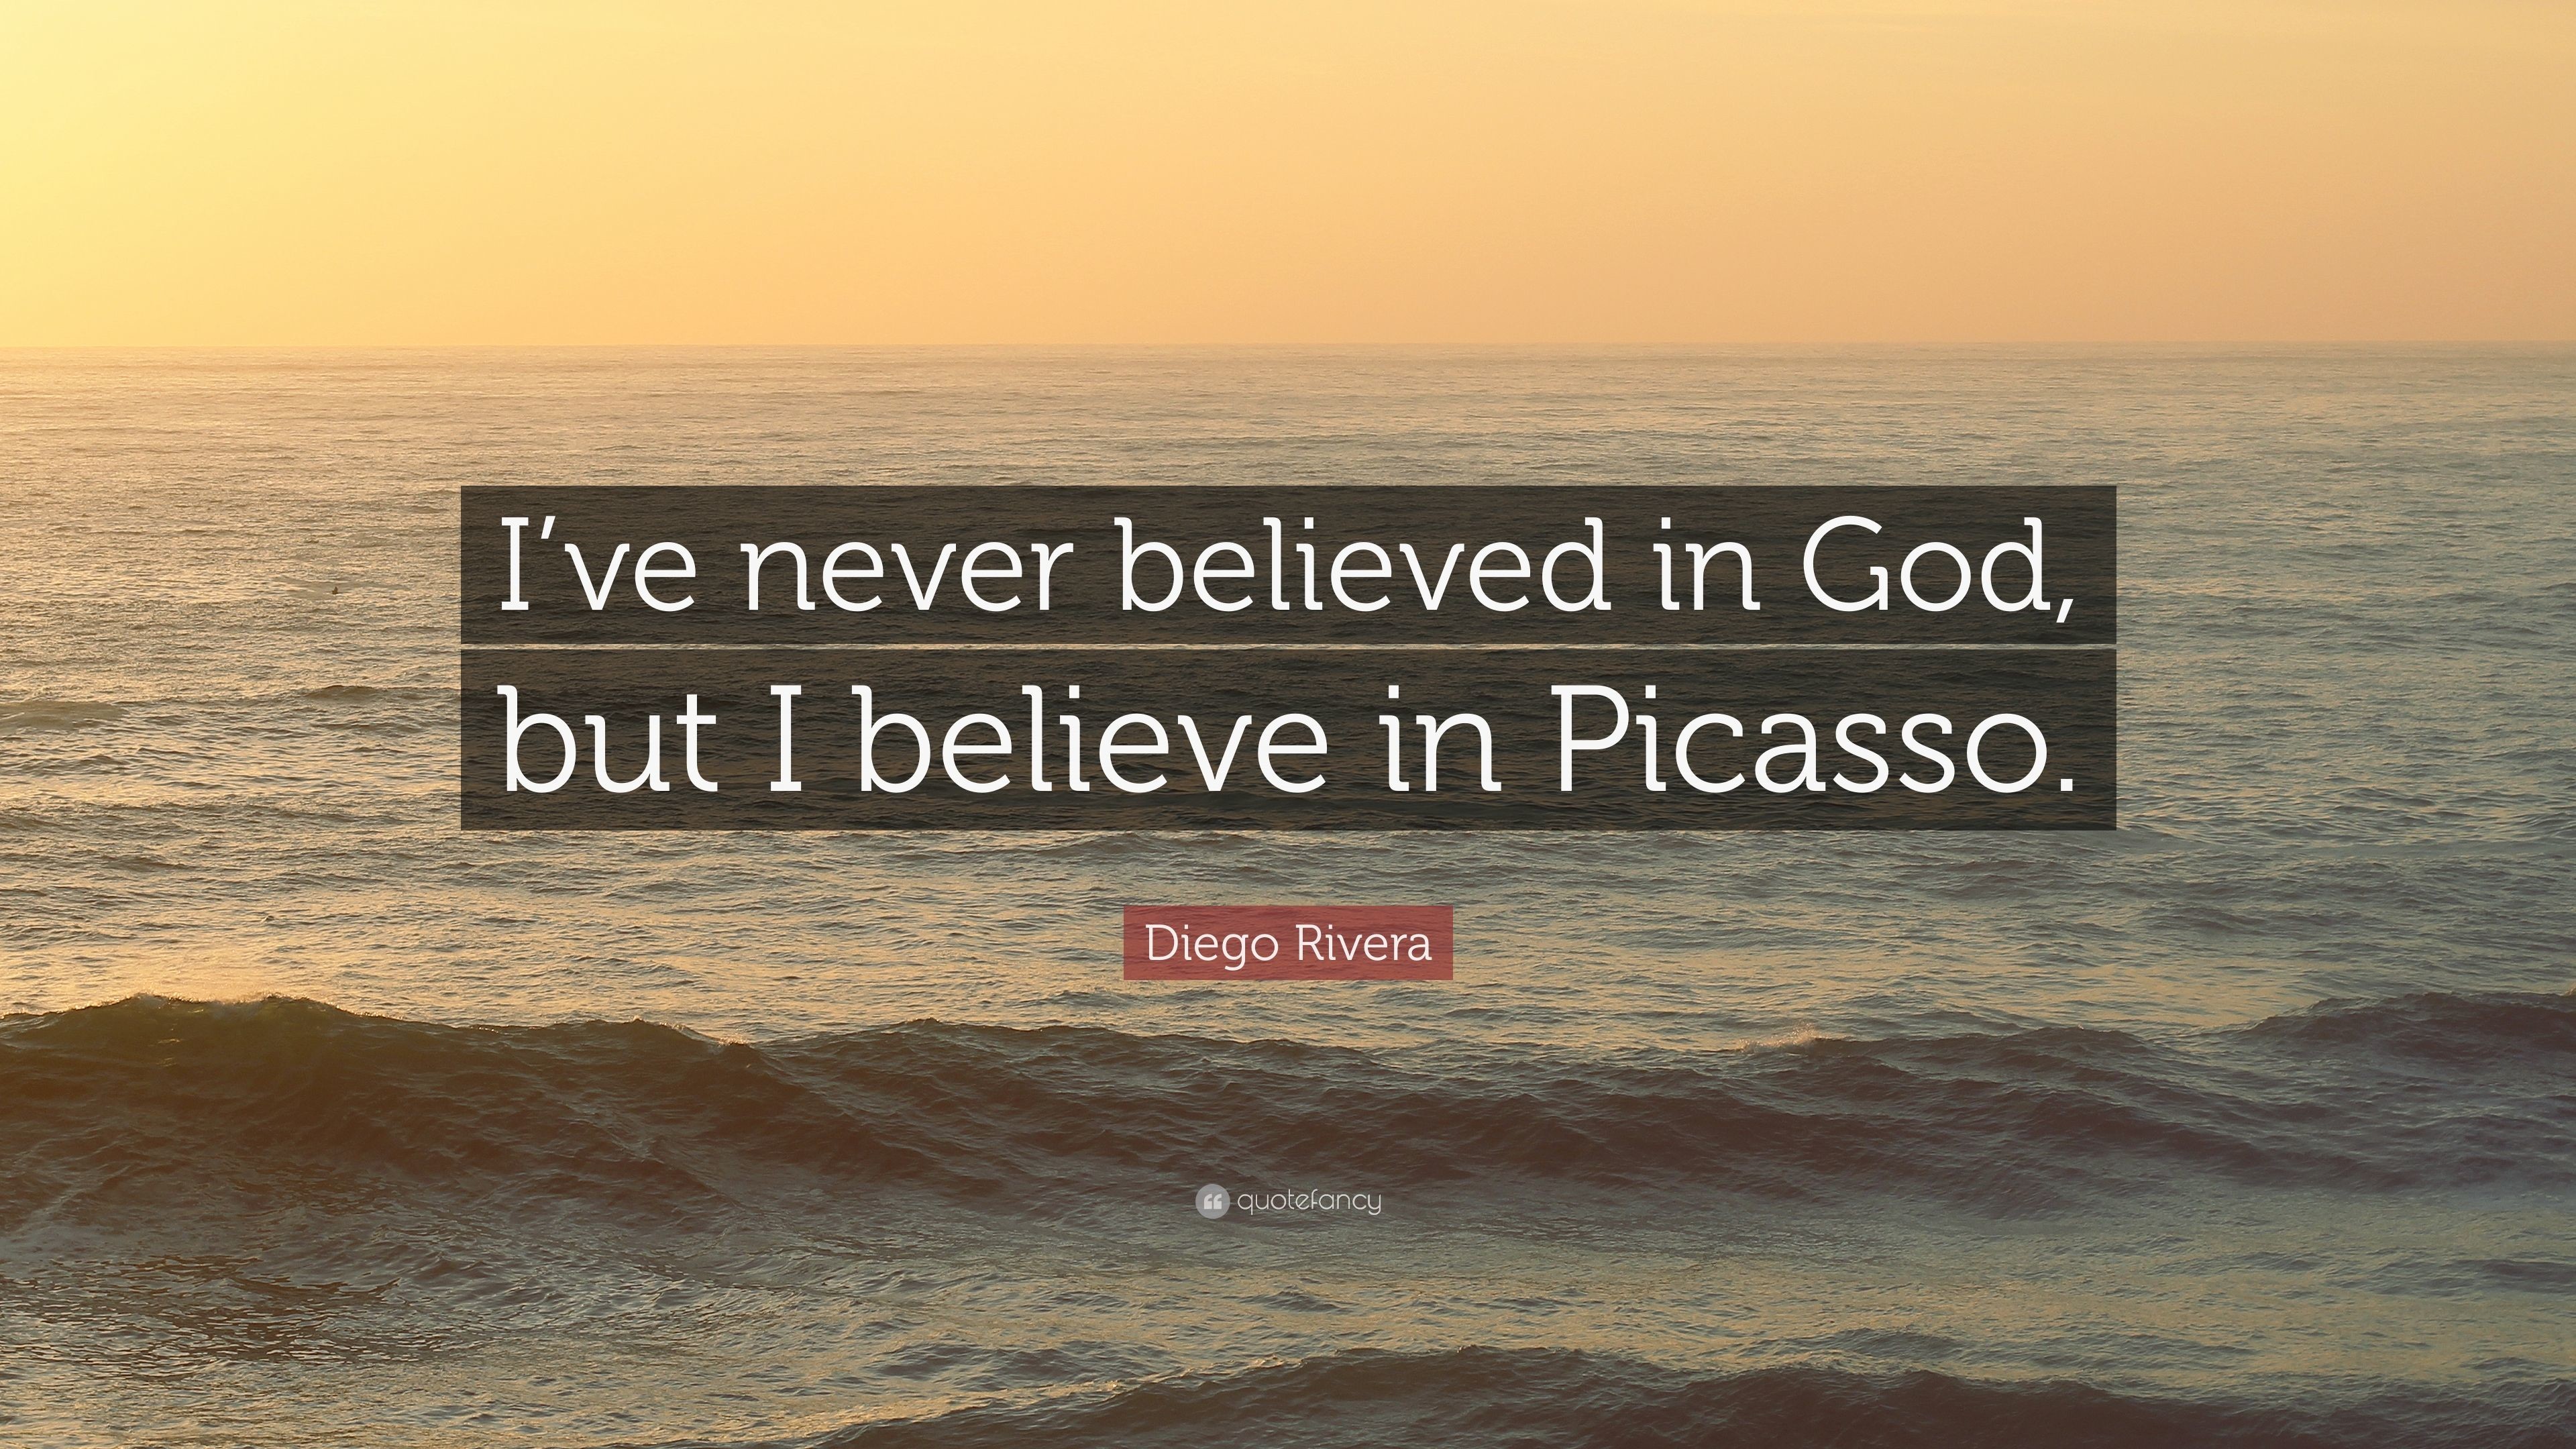 3840x2160 Diego Rivera Quote: “I've never believed in God, but I believe